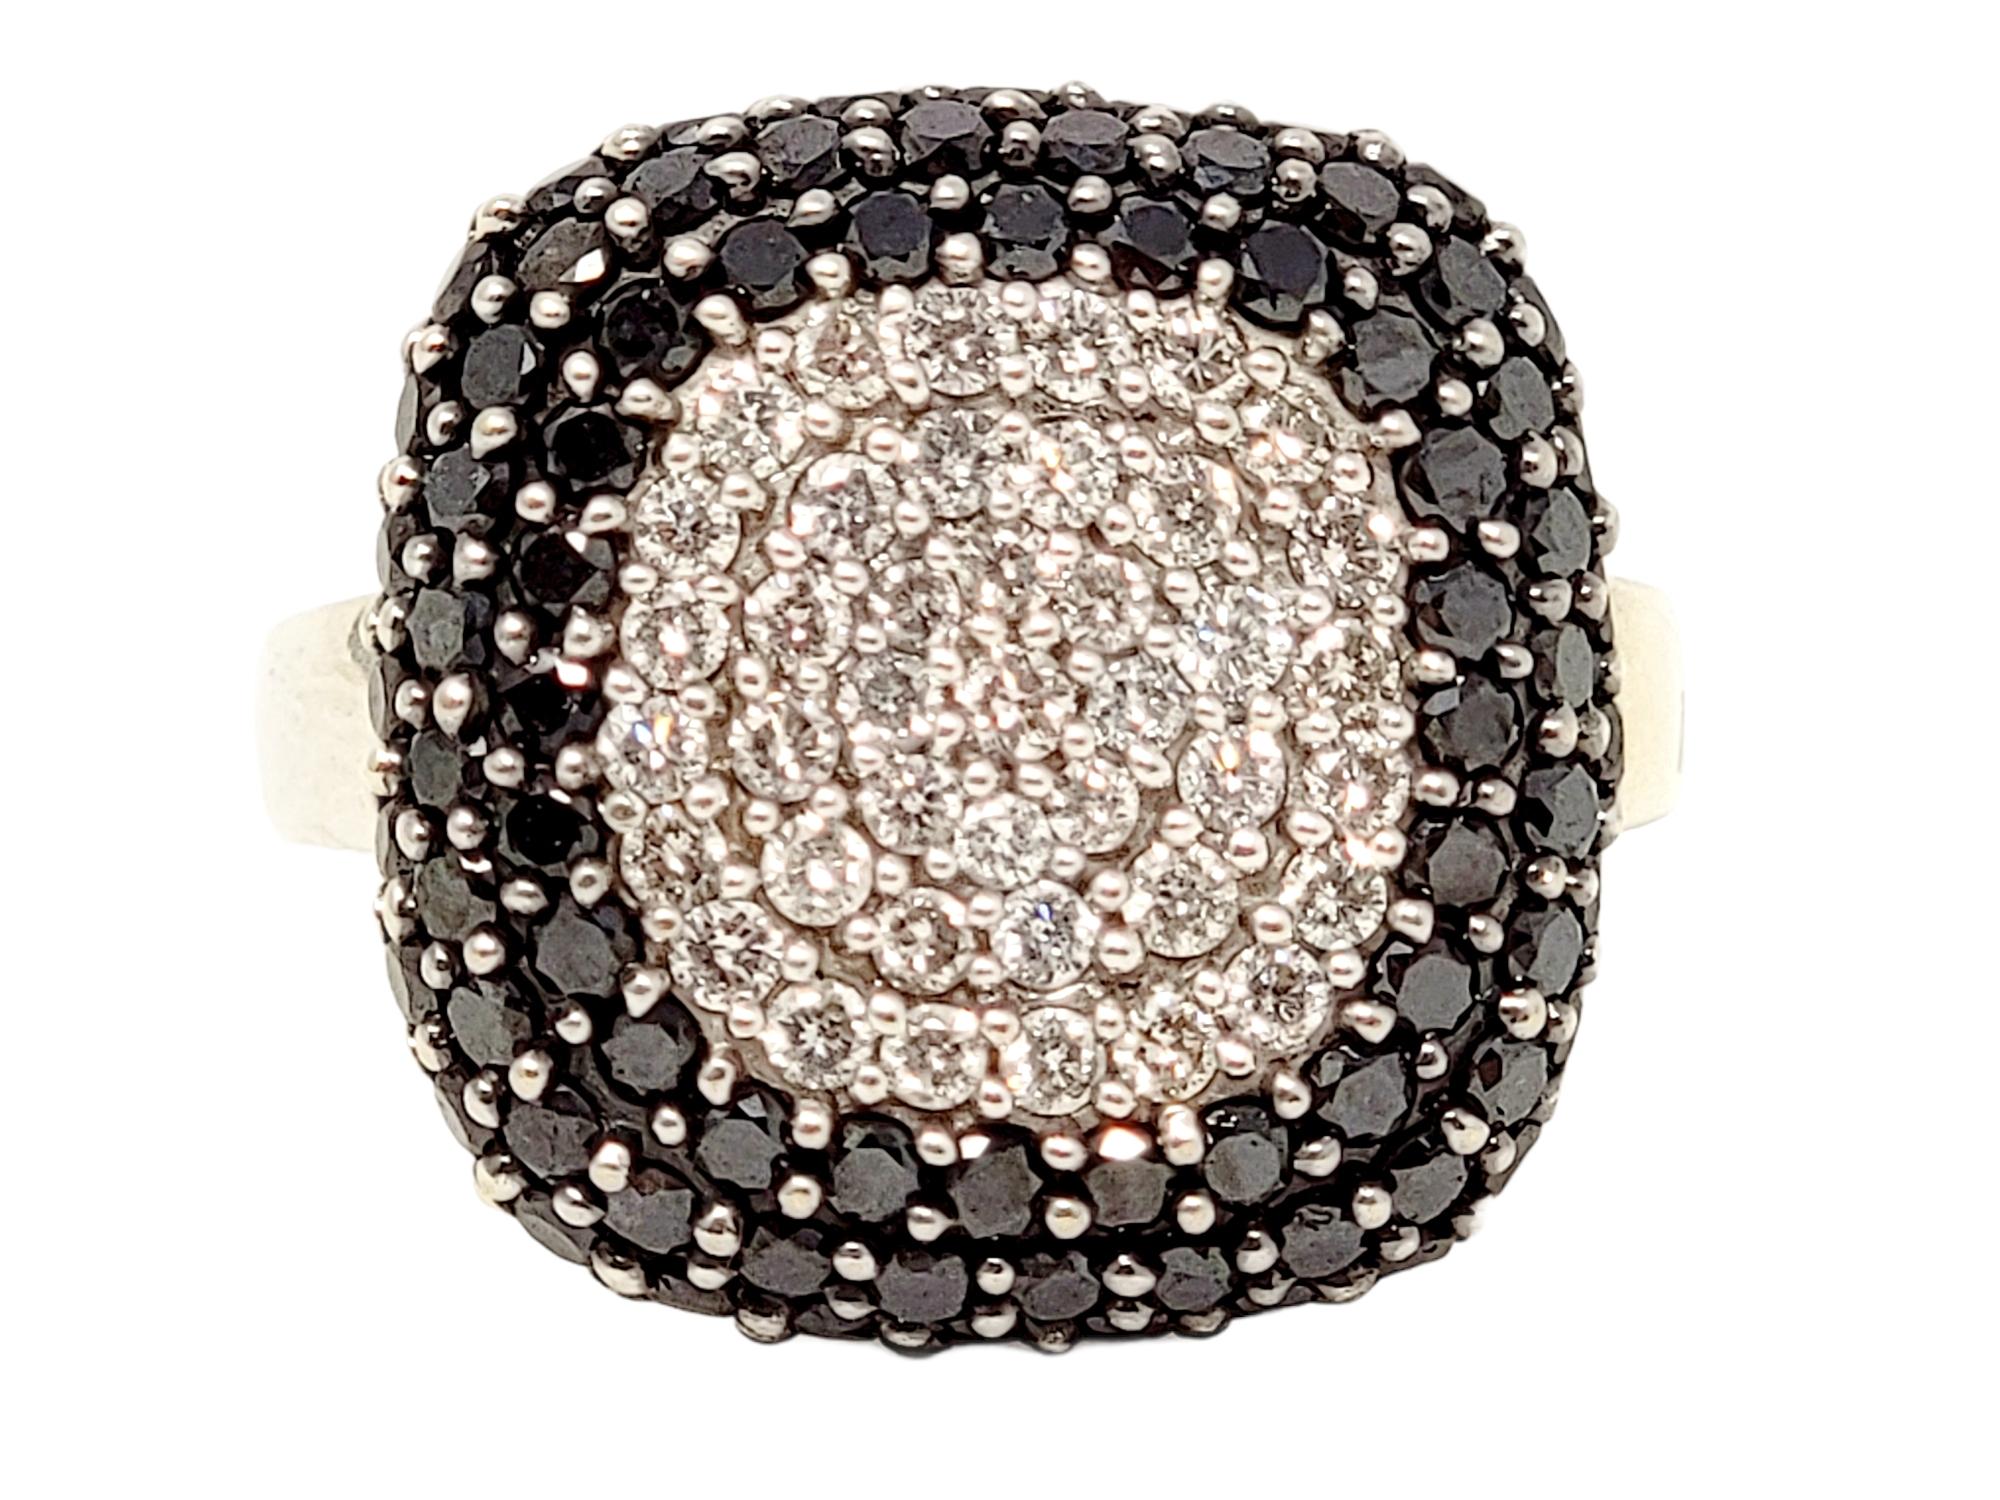 Ring size: 6.5

Brilliant black and white pave diamond cocktail ring by Effy fills the finger with modern glamour.

Ring size: 6.5
Weight: 8.00 grams
Metal: 14 Karat White Gold
Natural Diamonds: 2.02 ctw 
Diamond cut: Round Brilliant
Diamond color: